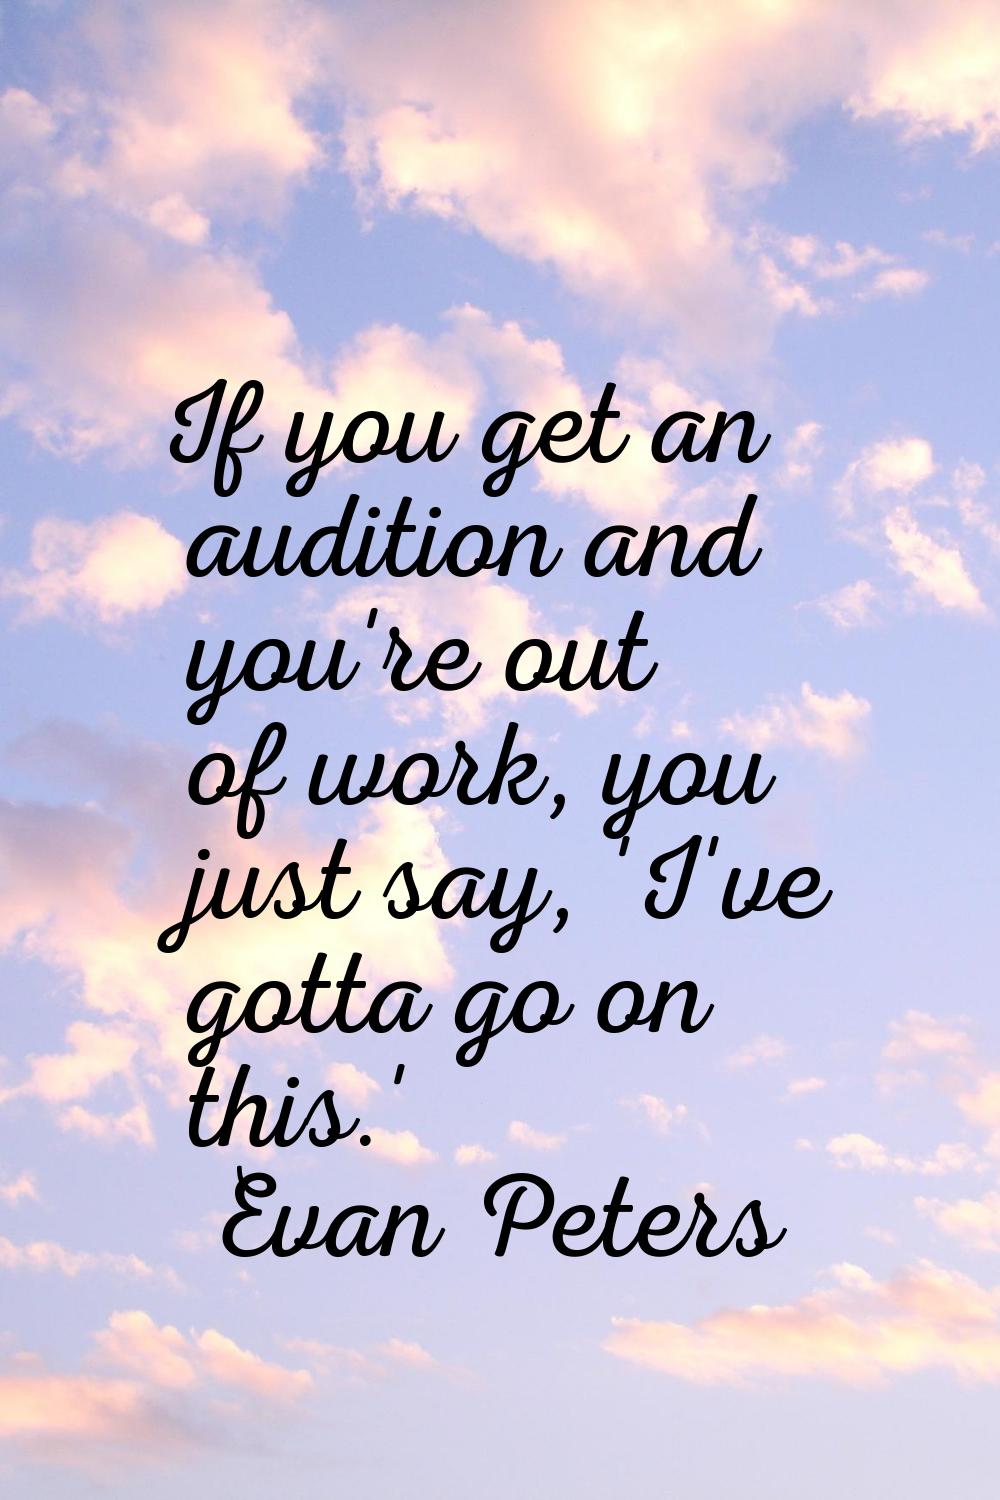 If you get an audition and you're out of work, you just say, 'I've gotta go on this.'